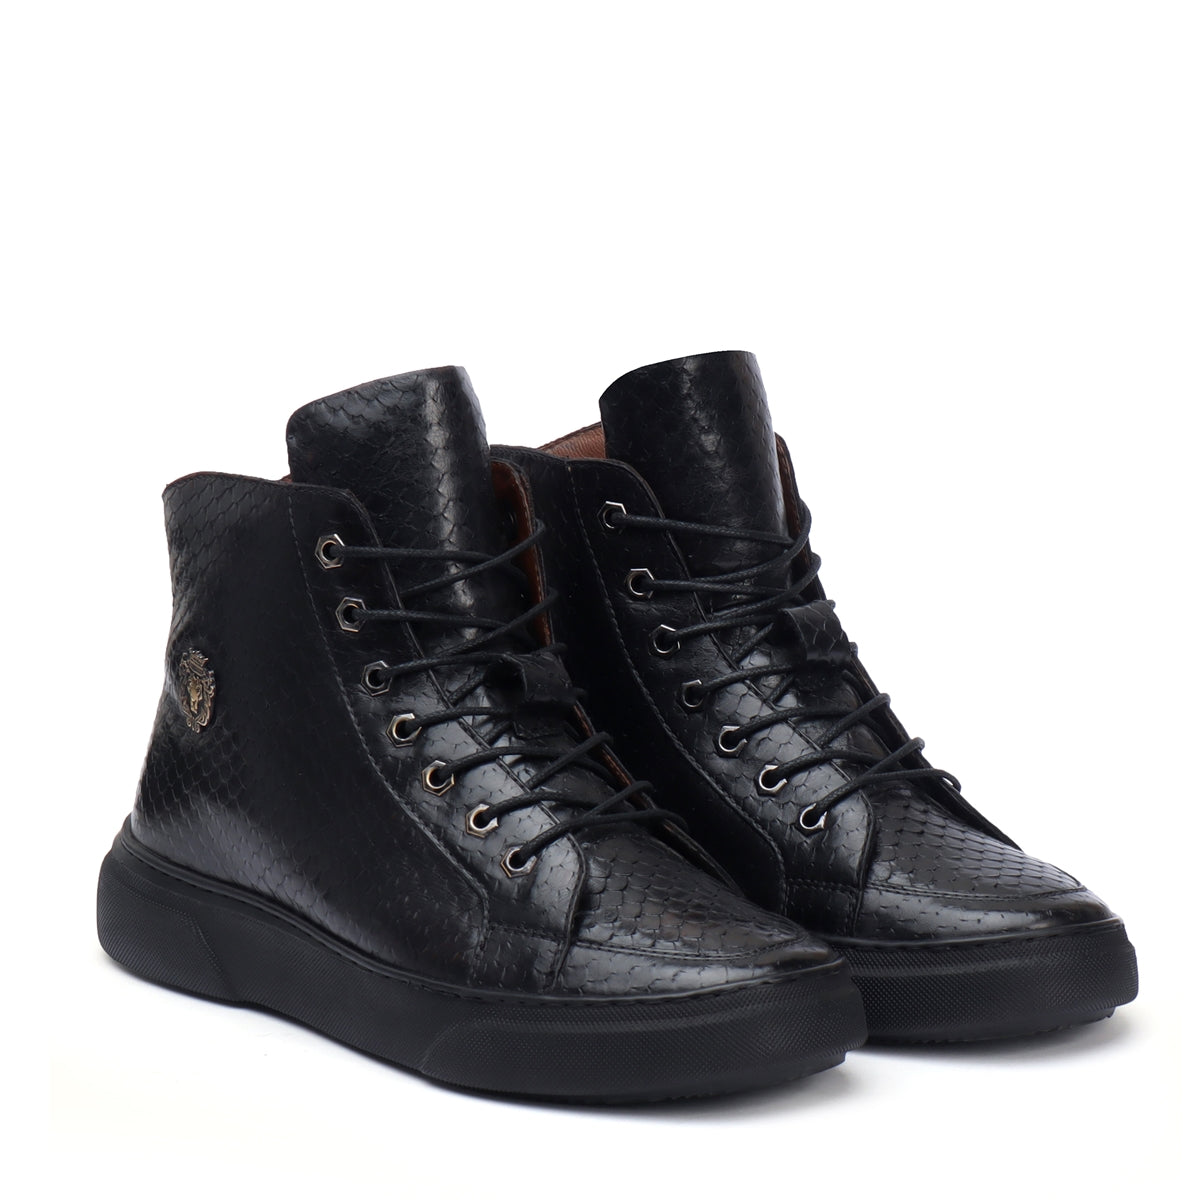 Black Snake Skin Textured Leather Mid Top Light Weight Sneakers by Brune & Bareskin